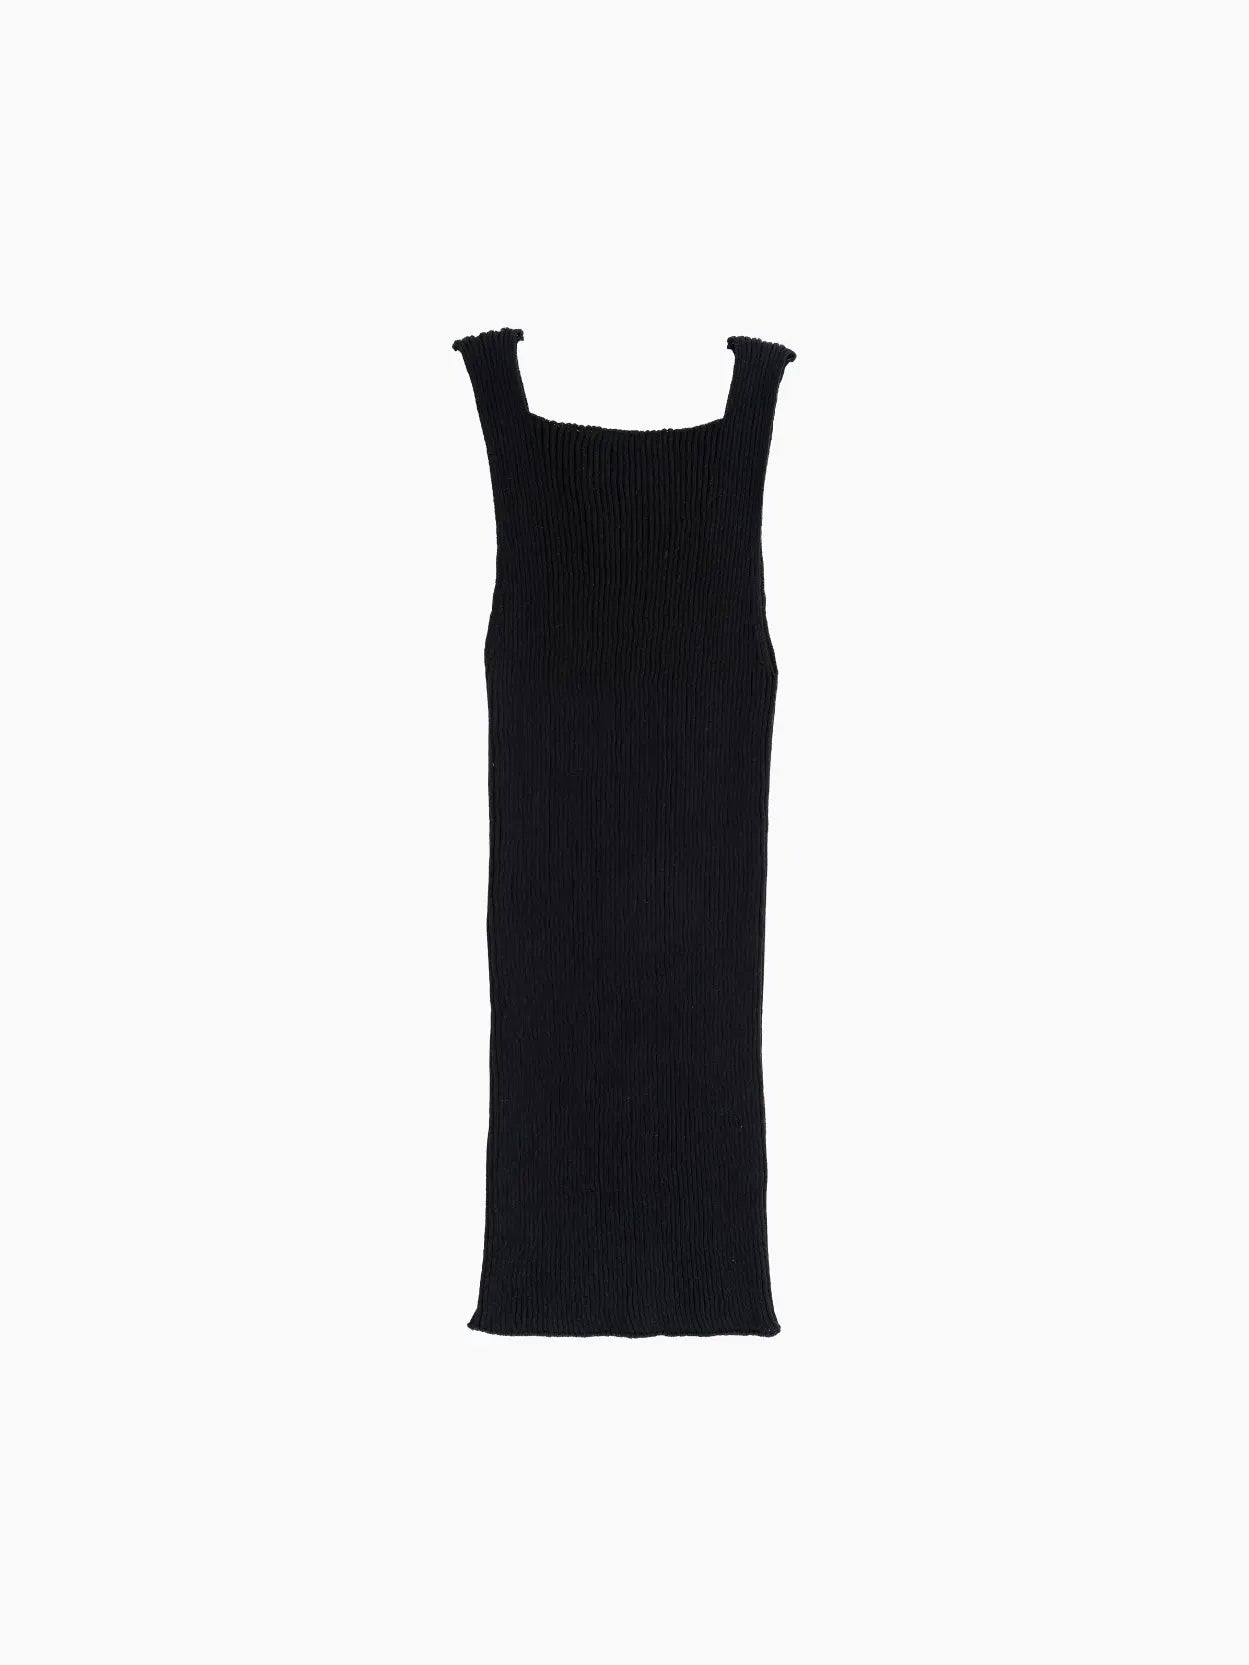 A sleeveless, black ribbed knit top with a square neckline. The top is of midi length and has a fitted silhouette, suitable for casual or semi-formal wear. The fabric appears to be stretchy and comfortable. Perfectly captured against a plain white background, this stylish piece is available at Bassalstore in Barcelona.

Product Name: Junko Top Black
Brand Name: Rus